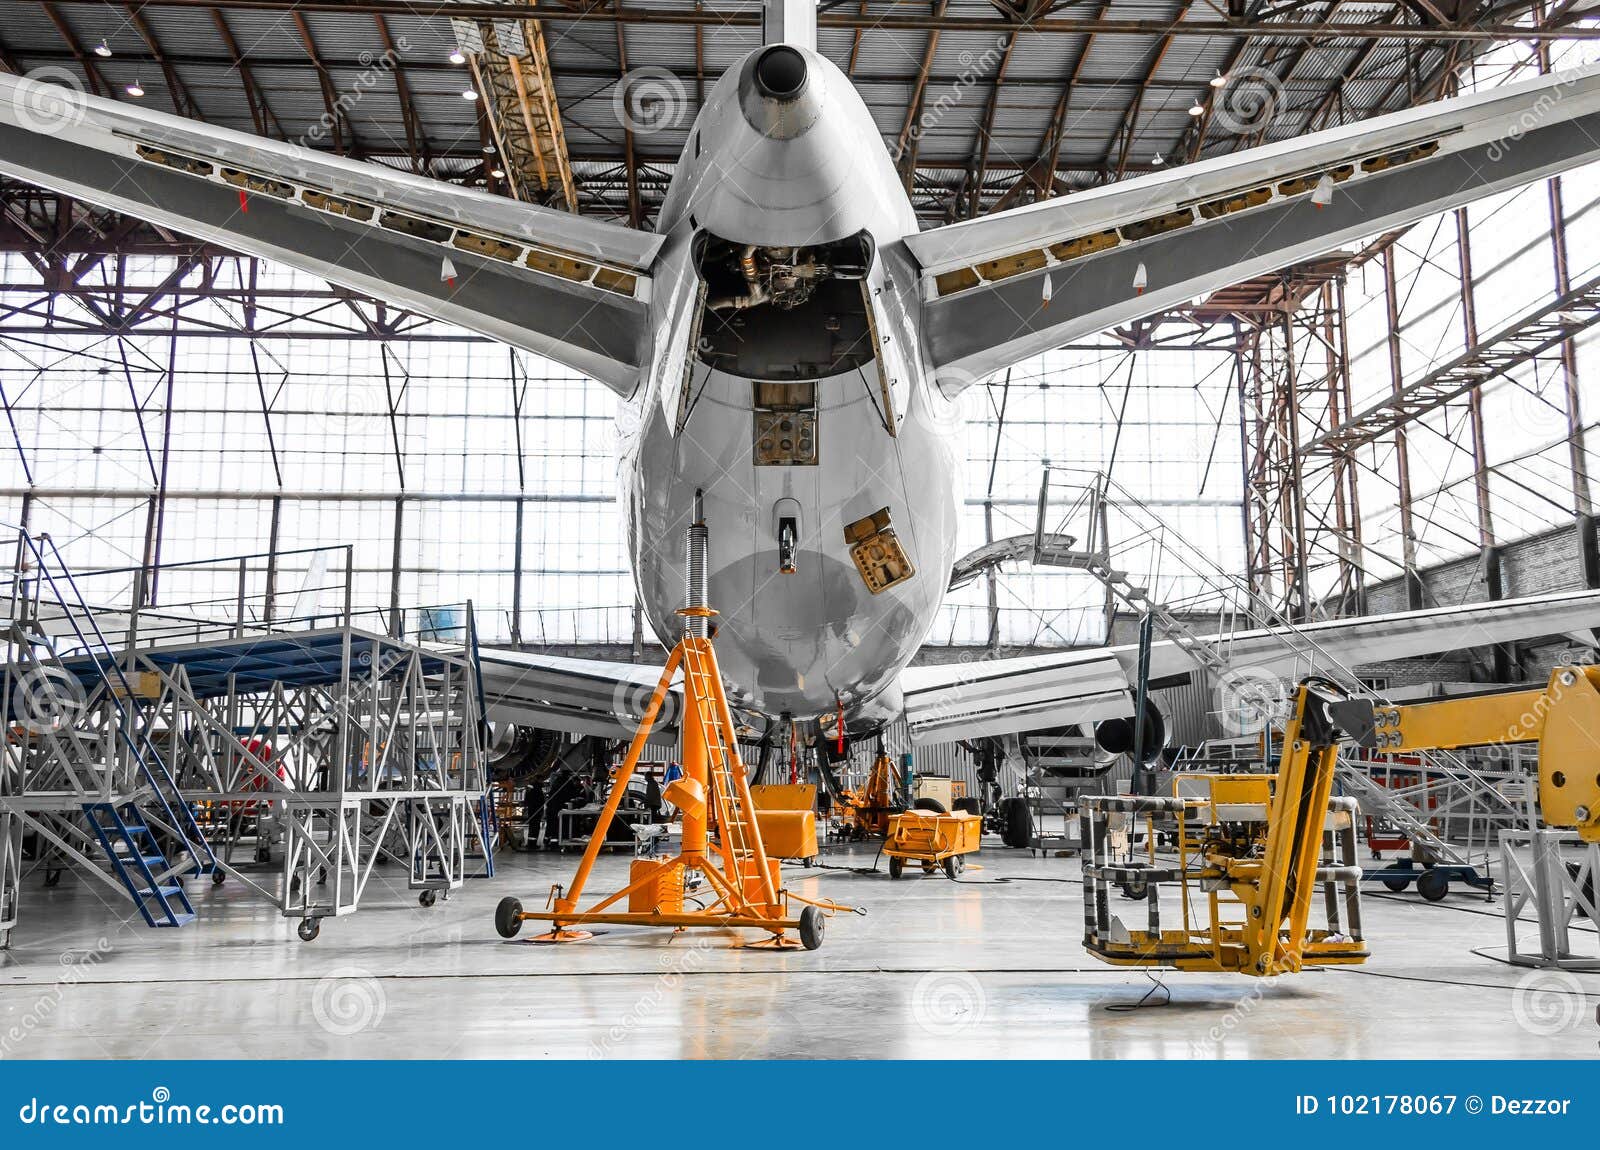 large passenger aircraft on service in an aviation hangar rear view of the tail, on the auxiliary power unit.